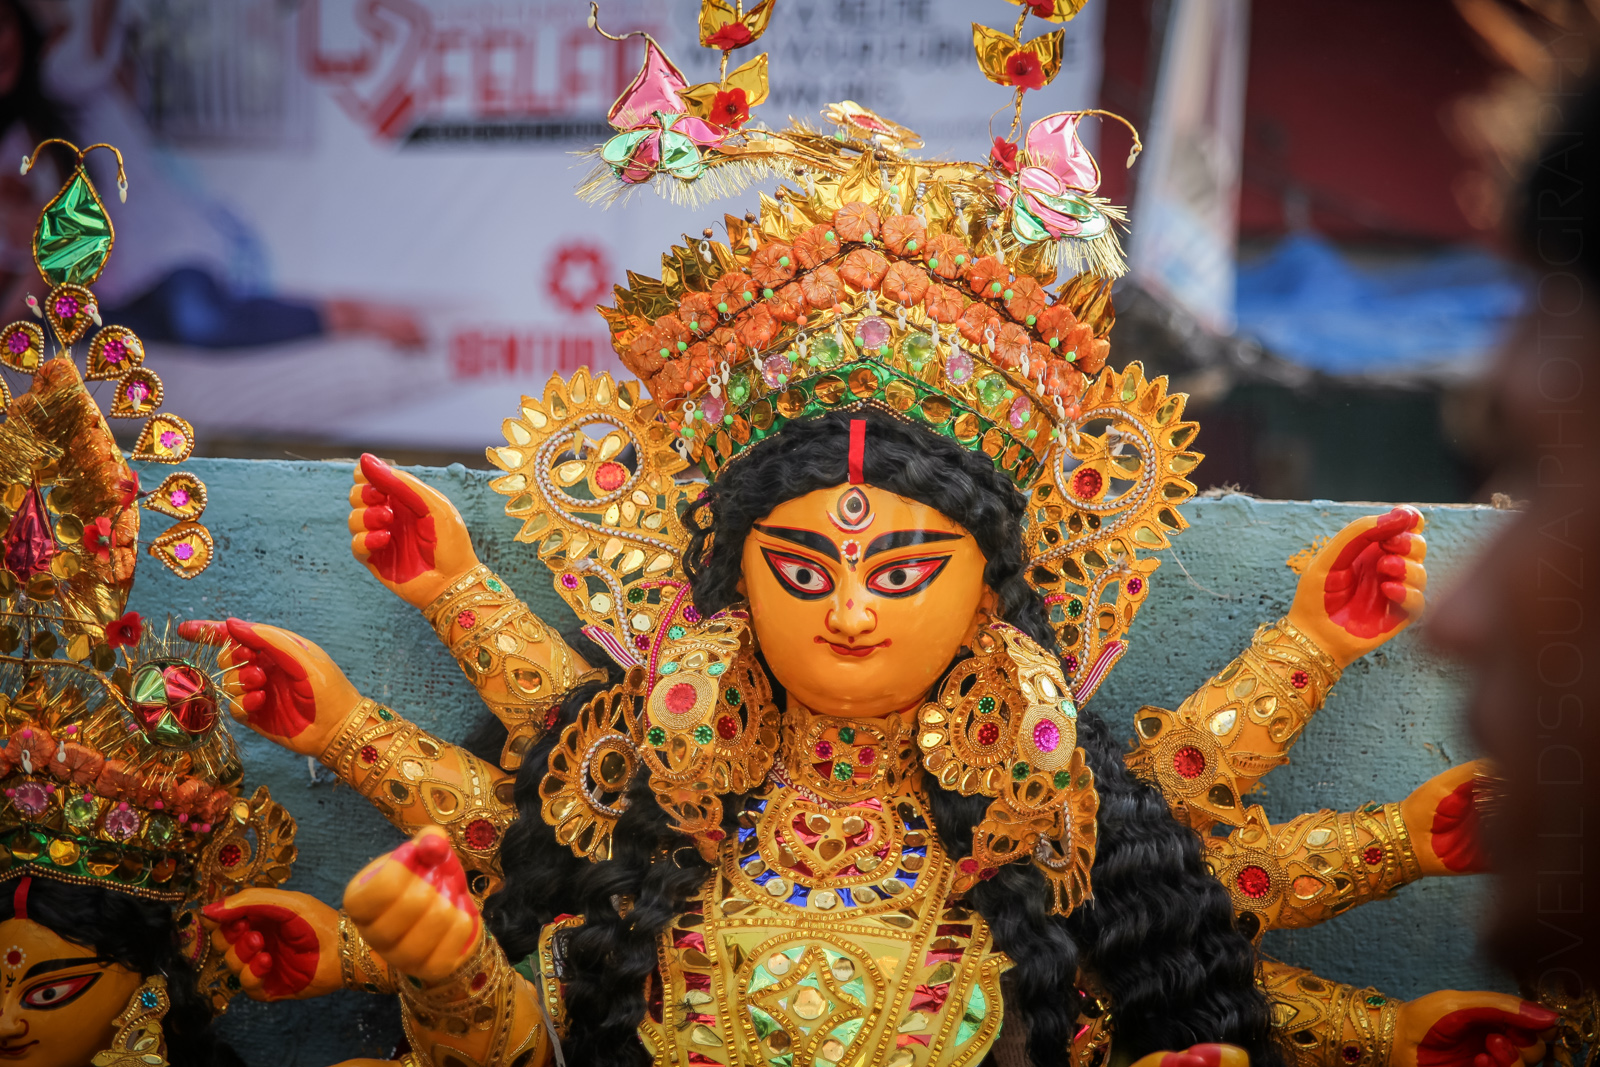 Up close and personal with Durga Maa